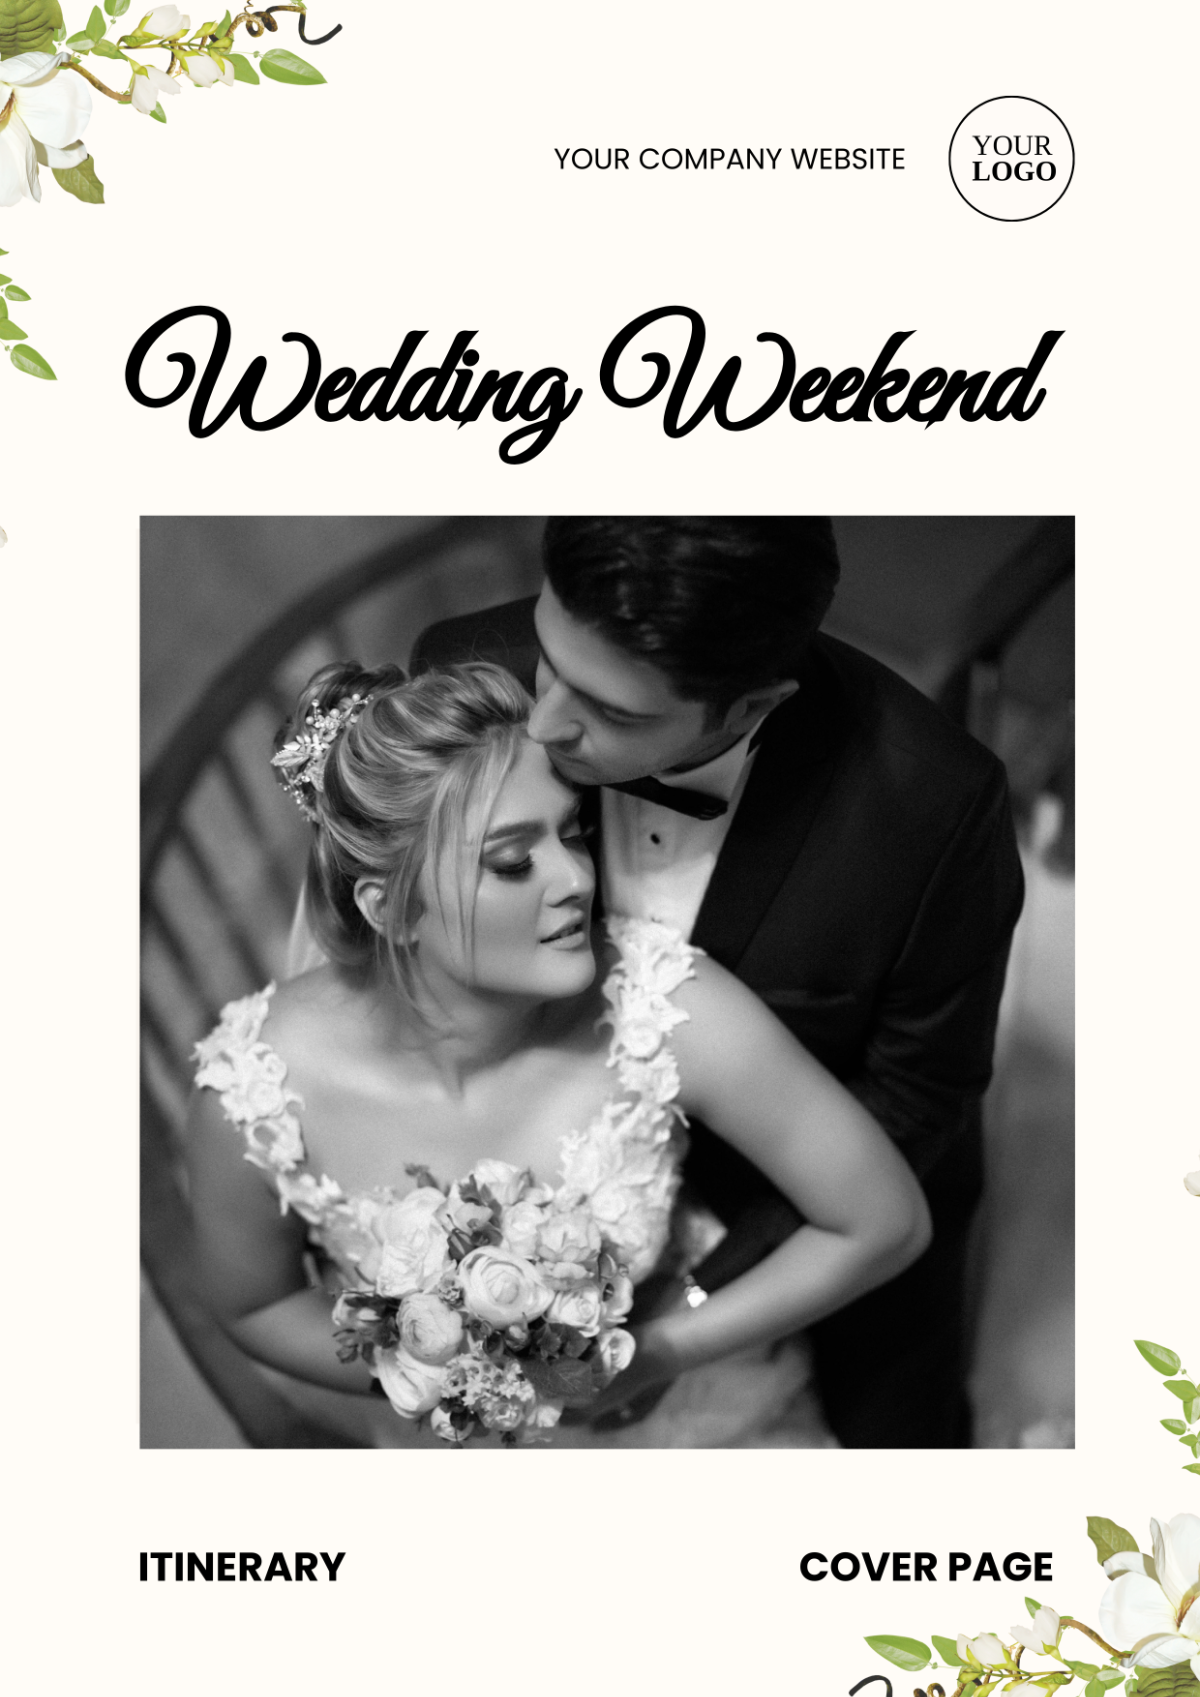 Free Wedding Weekend Itinerary Cover Page Template